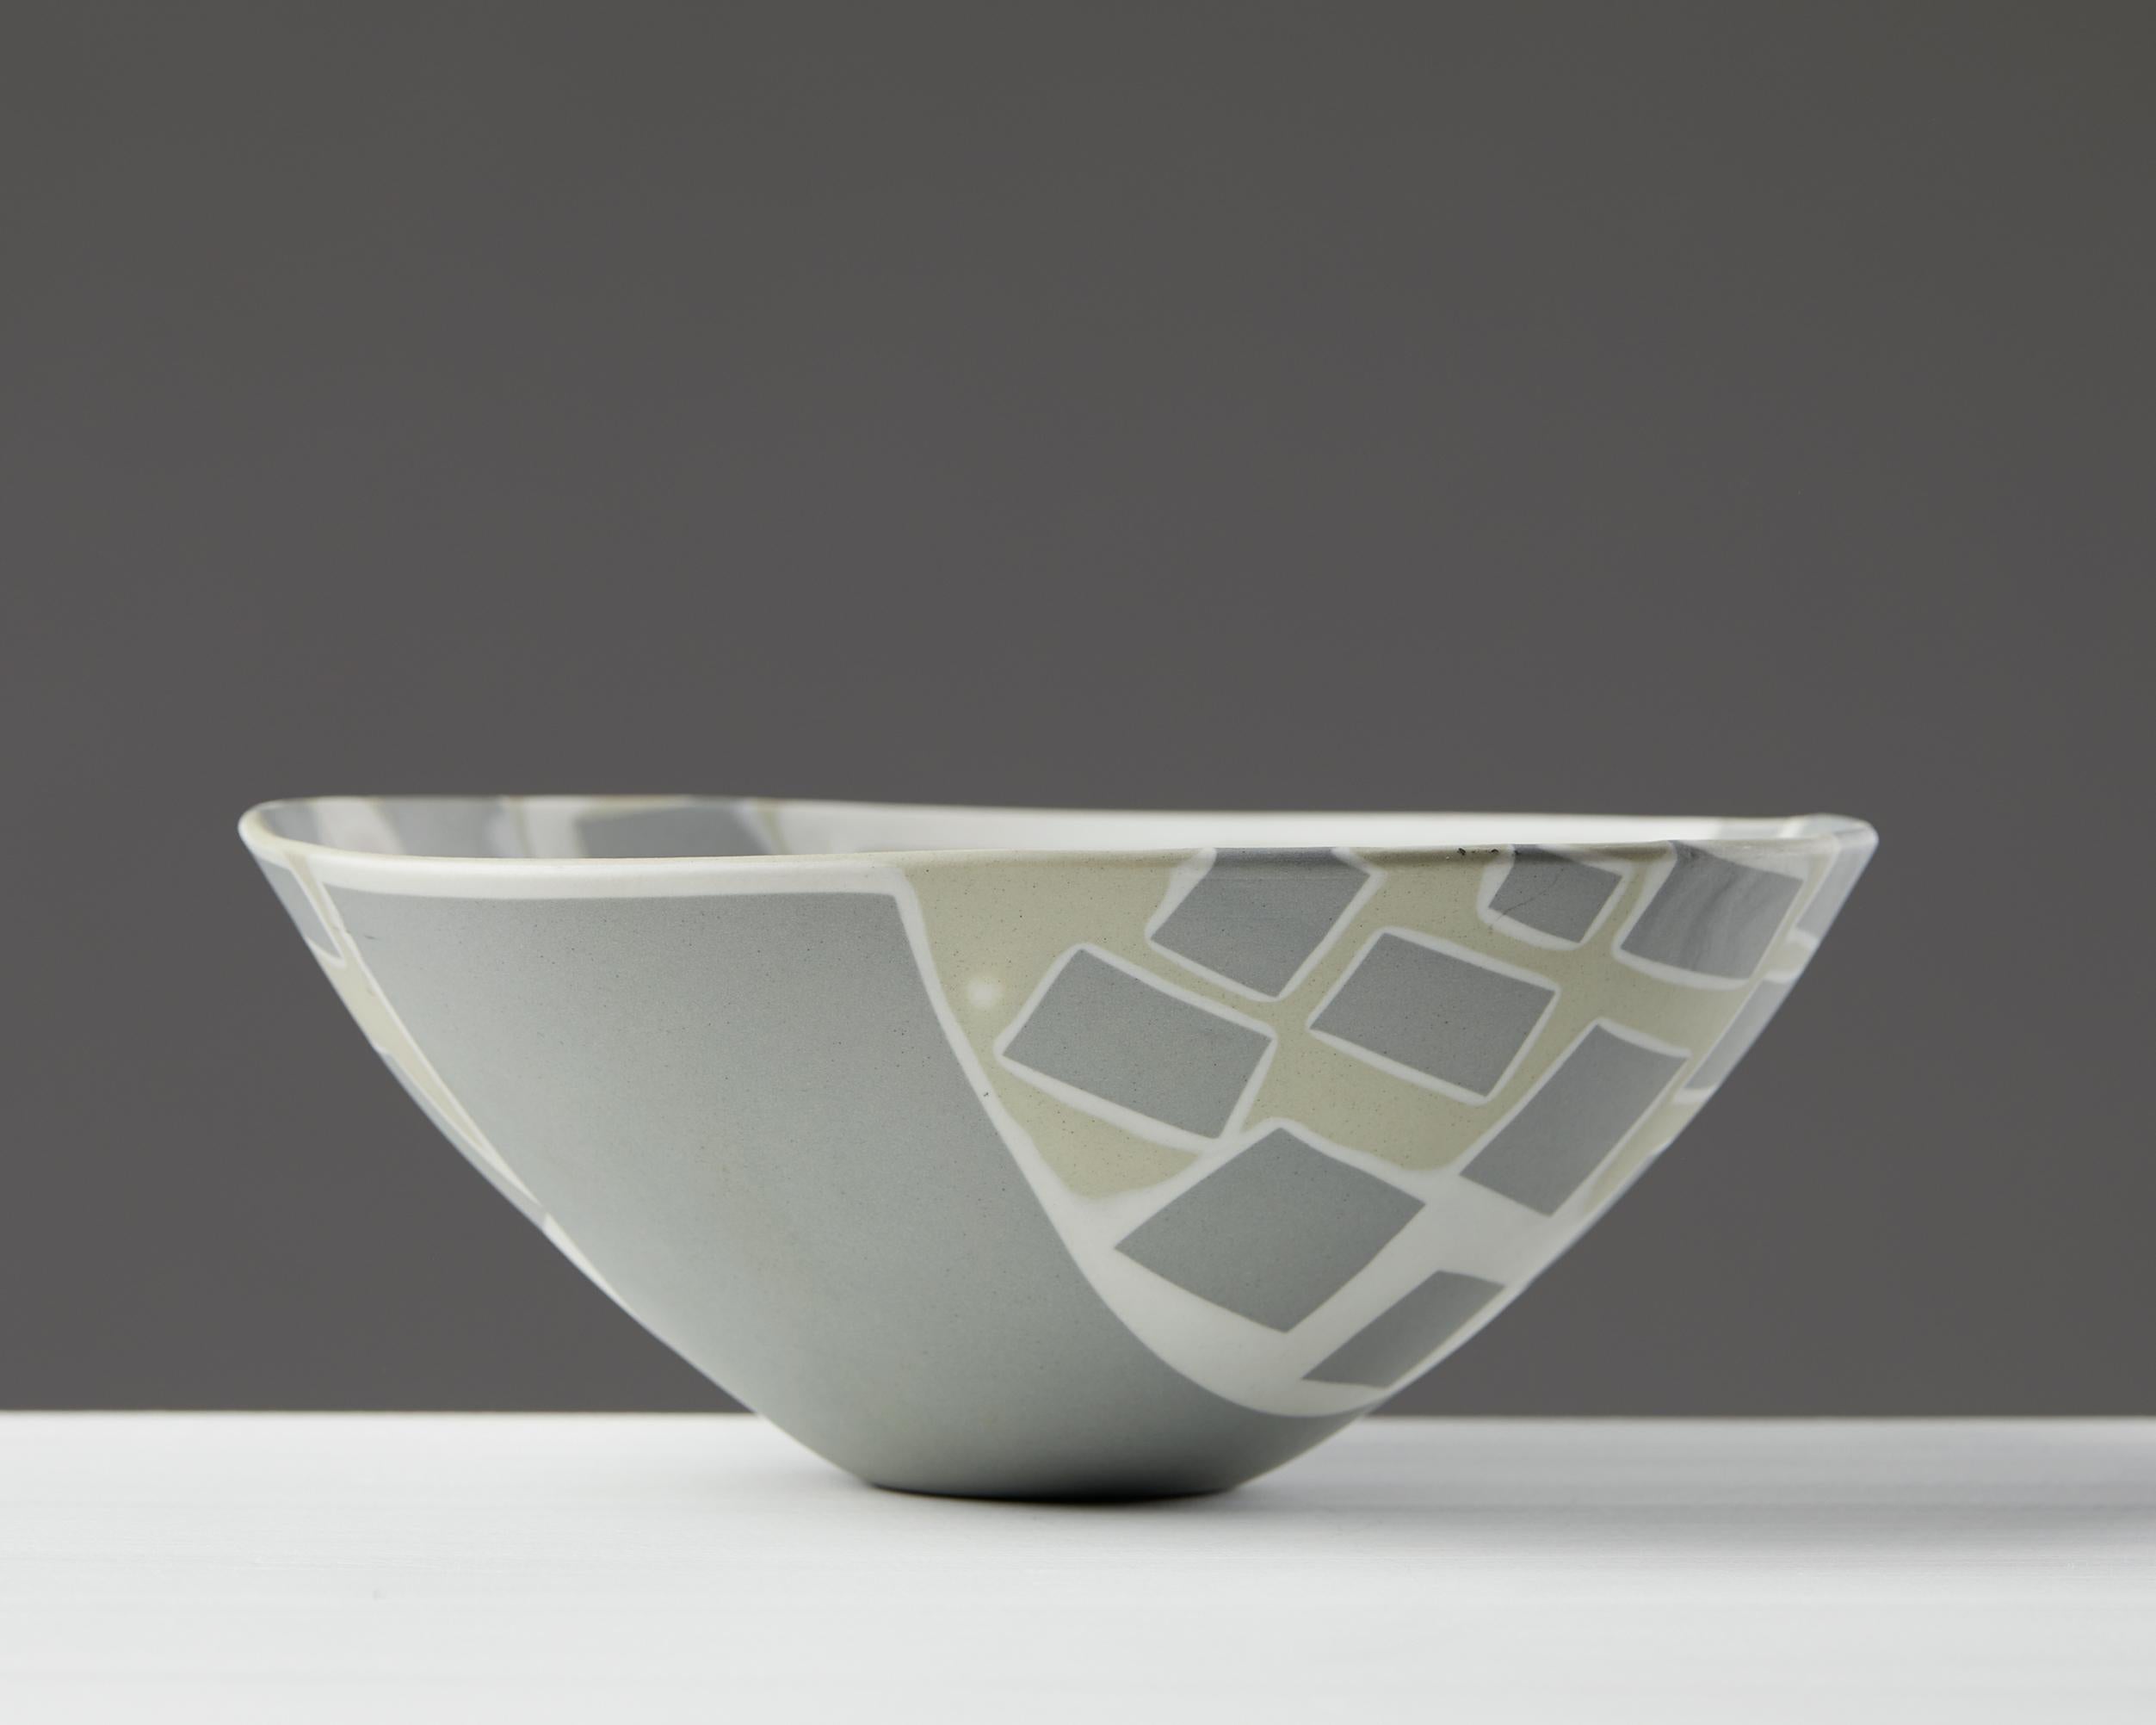 Scandinavian Modern Stoneware Bowl Designed by Aune Siimes for Arabia, Finland, 1950s, geometric For Sale